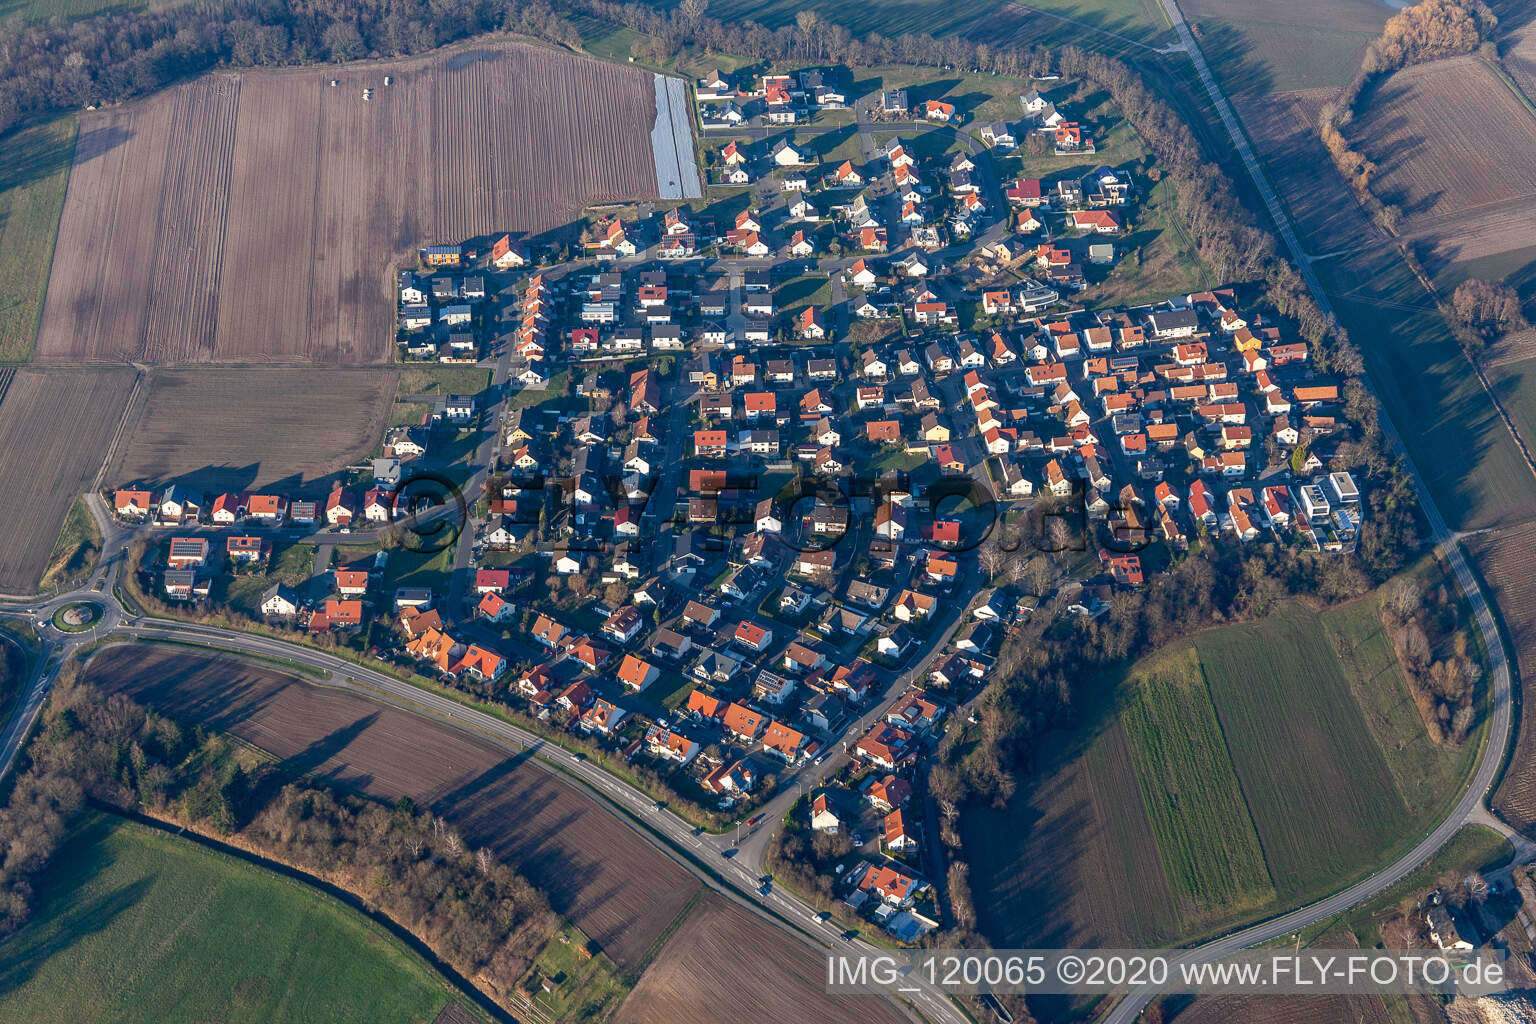 Hardtwald in Neupotz in the state Rhineland-Palatinate, Germany from above